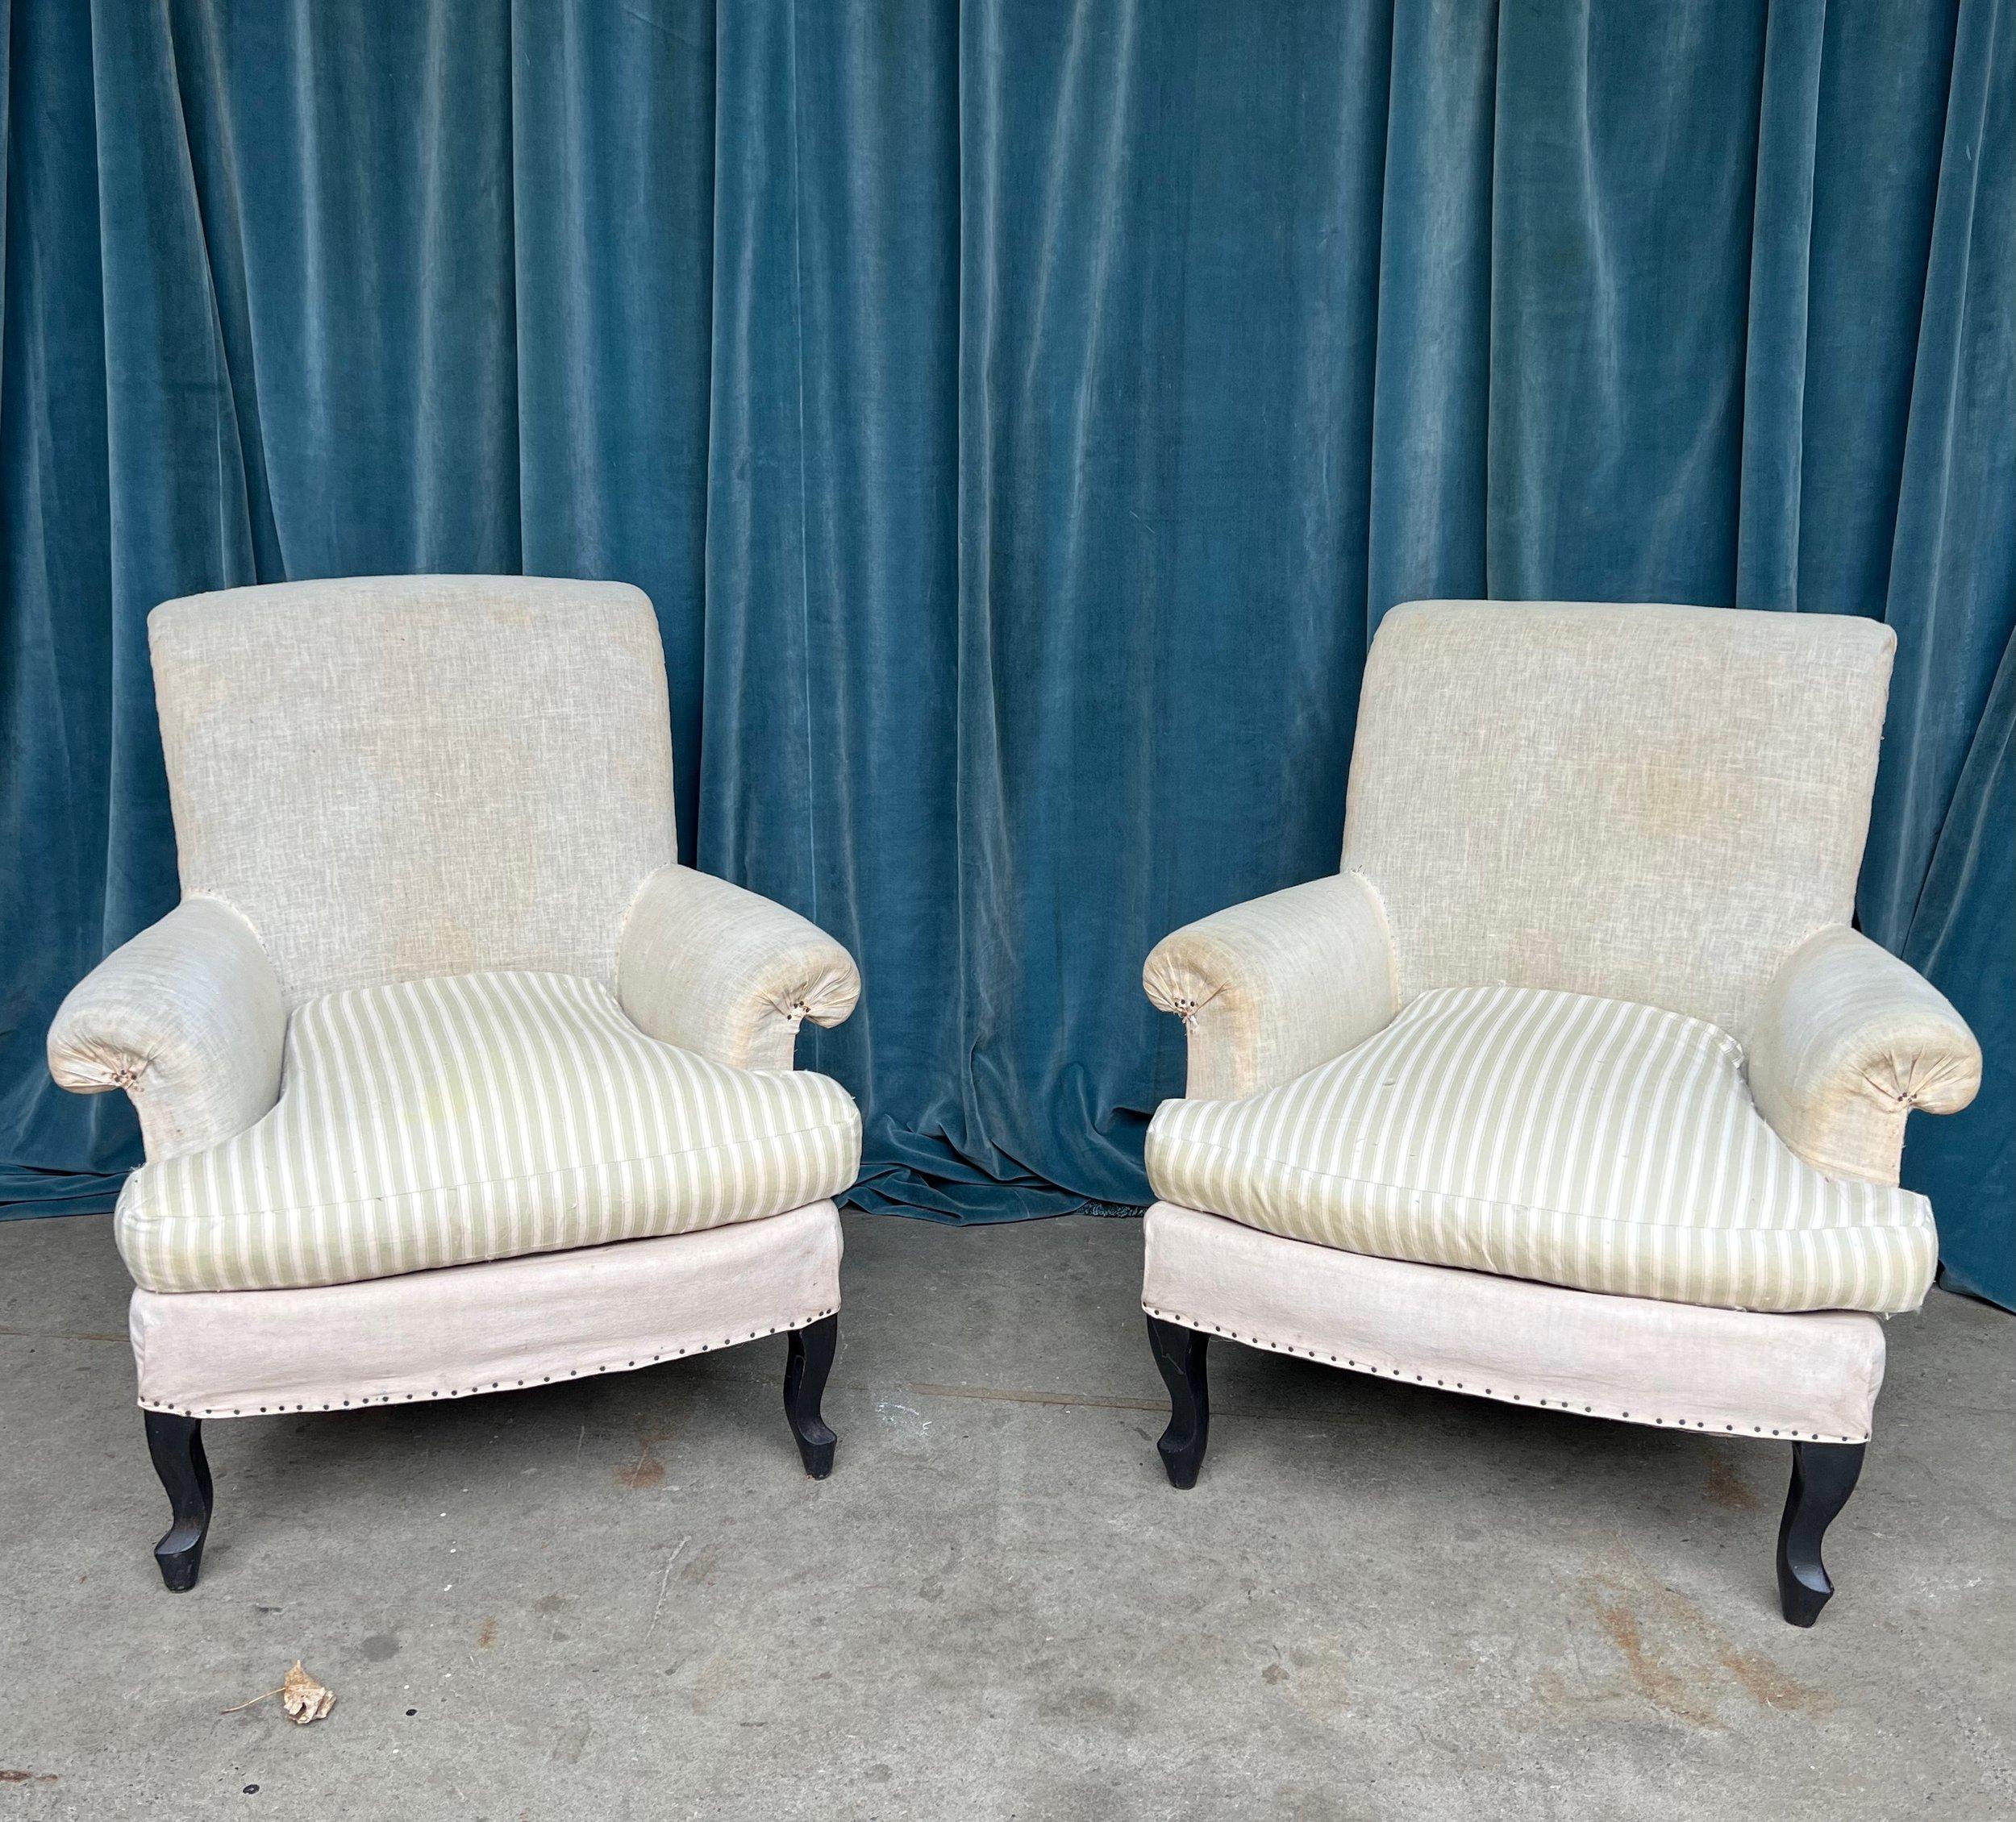 Pair of Scrolled Back Napoleon III Armchairs with Loose Seat Cushions For Sale 3